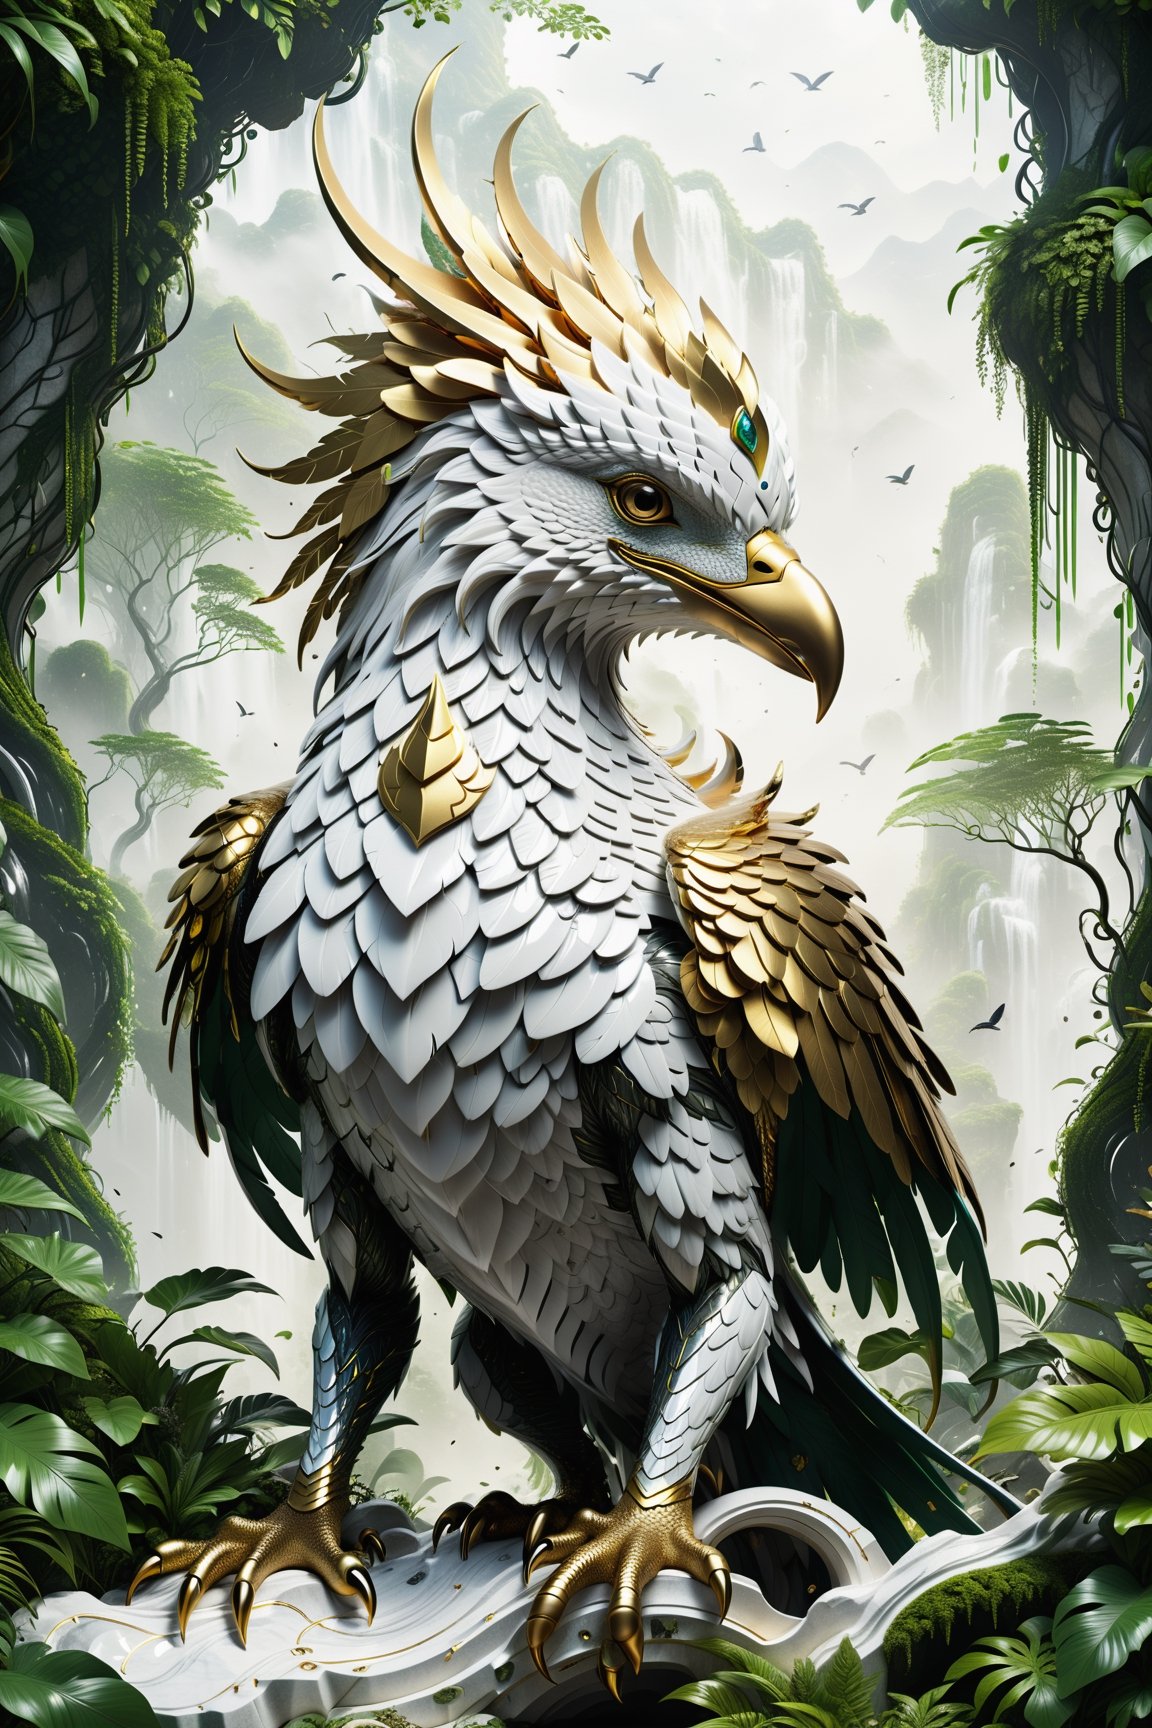 High definition photorealistic render of an incredible and mysterious futuristic mythical creature with scales, hair,  wings and bird feathers, in splosion monster with parametric shape and structure in the word, curved and fluid shapes in a thick jungle full of a lot of vegetation and trees with vines and rocks with moss, in white marble with intricate gold details, luxurious details and parametric architectural style in marble and metal, epic pose
​